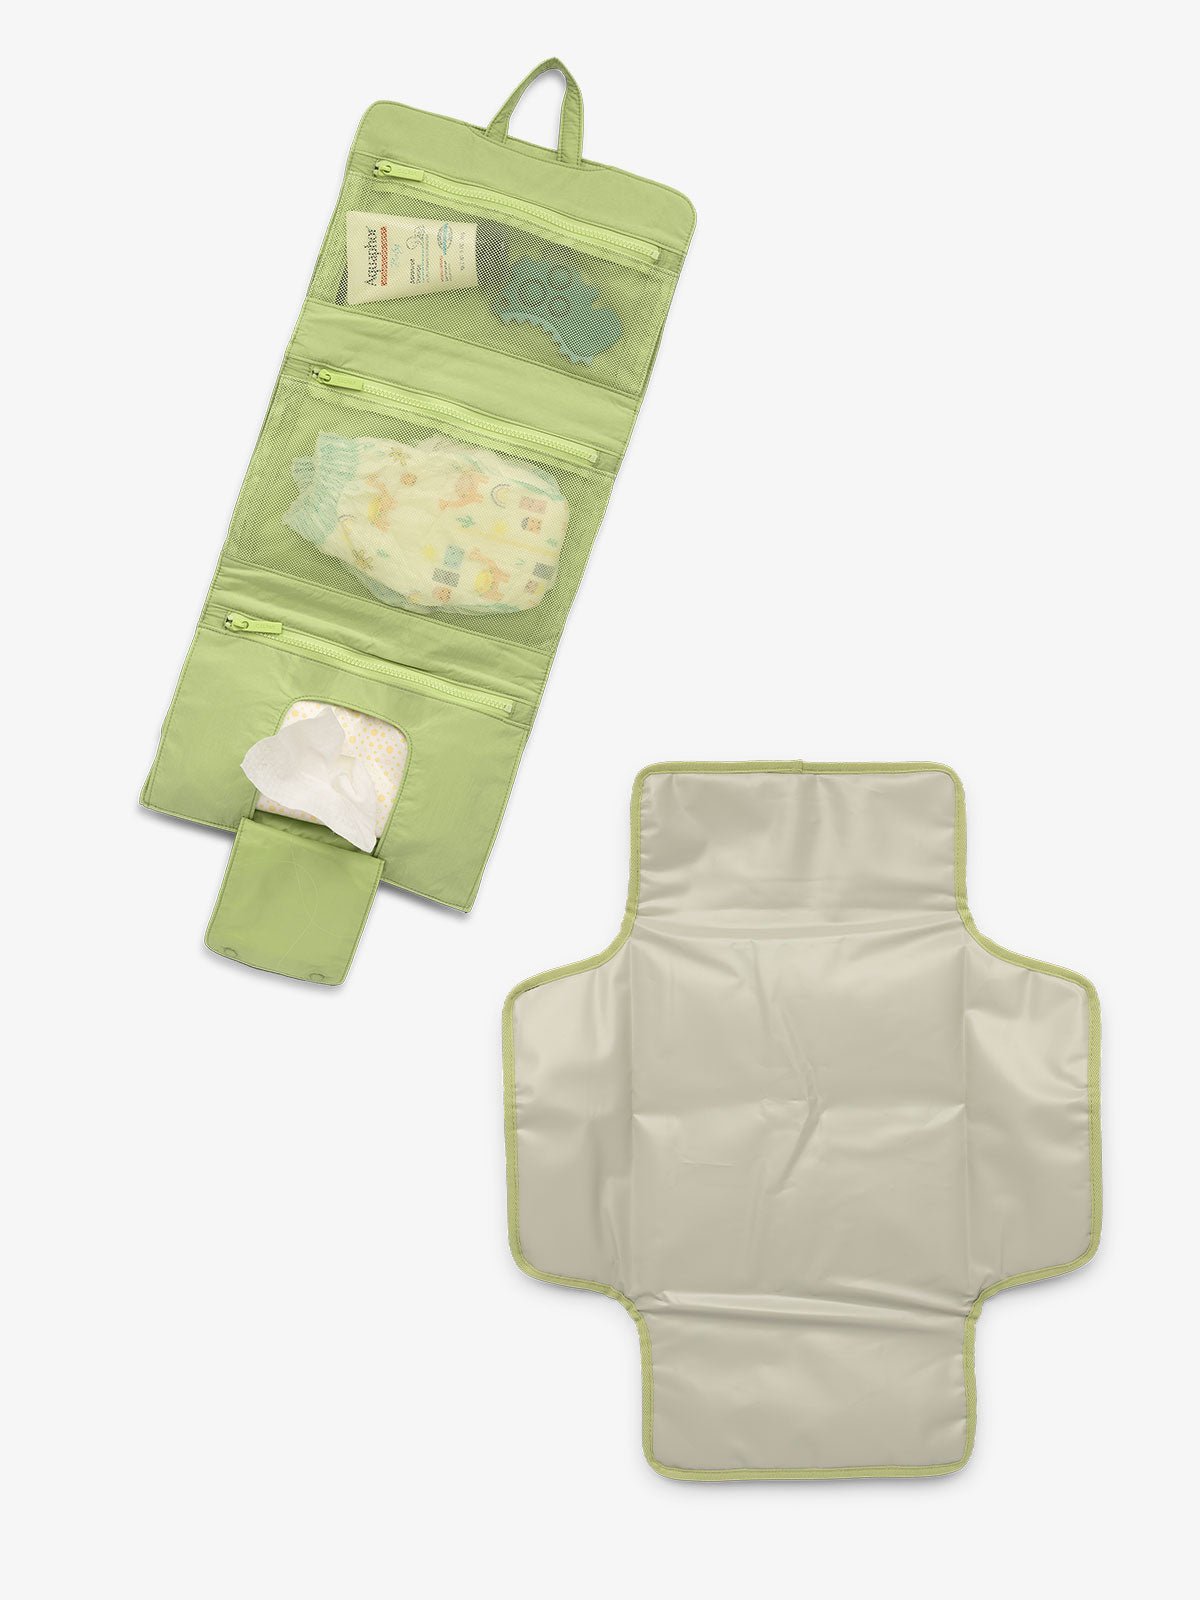 CALPAK portable changing pad includes multiple pockets, collapsing hanging hook, and detachable changing pad in green